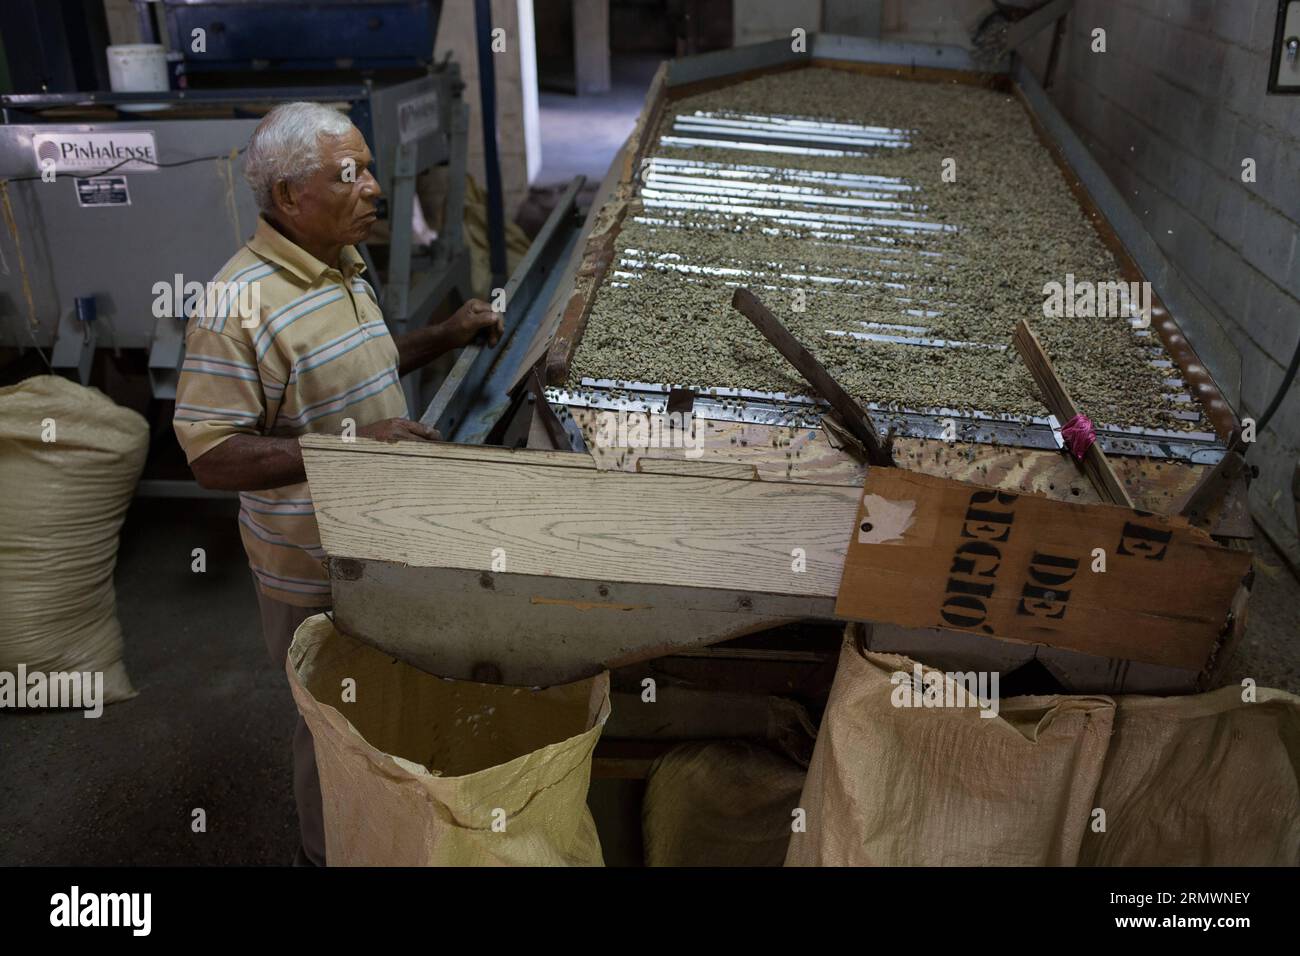 (141106) -- SAN CRISTOBAL,  -- Image taken on Oct. 28, 2014 shows a day laborer selecting coffee beans by their weight and size at a storehouse managed by La Esperanza Association of Coffee Growers (ASOCAES, for its acronym in Spanish) of Los Cacaos municipality, in San Cristobal, Dominican Republic. The life of 10 percent of the Dominican population revolves around coffee production. Fran Afonso) DOMINICAN REPUBLIC-SAN CRISTOBAL-AGRICULTURE-COFFEE e FRANxAFONSO PUBLICATIONxNOTxINxCHN   San Cristobal Image Taken ON OCT 28 2014 Shows a Day laborer selecting Coffee Beans by their Weight and Size Stock Photo